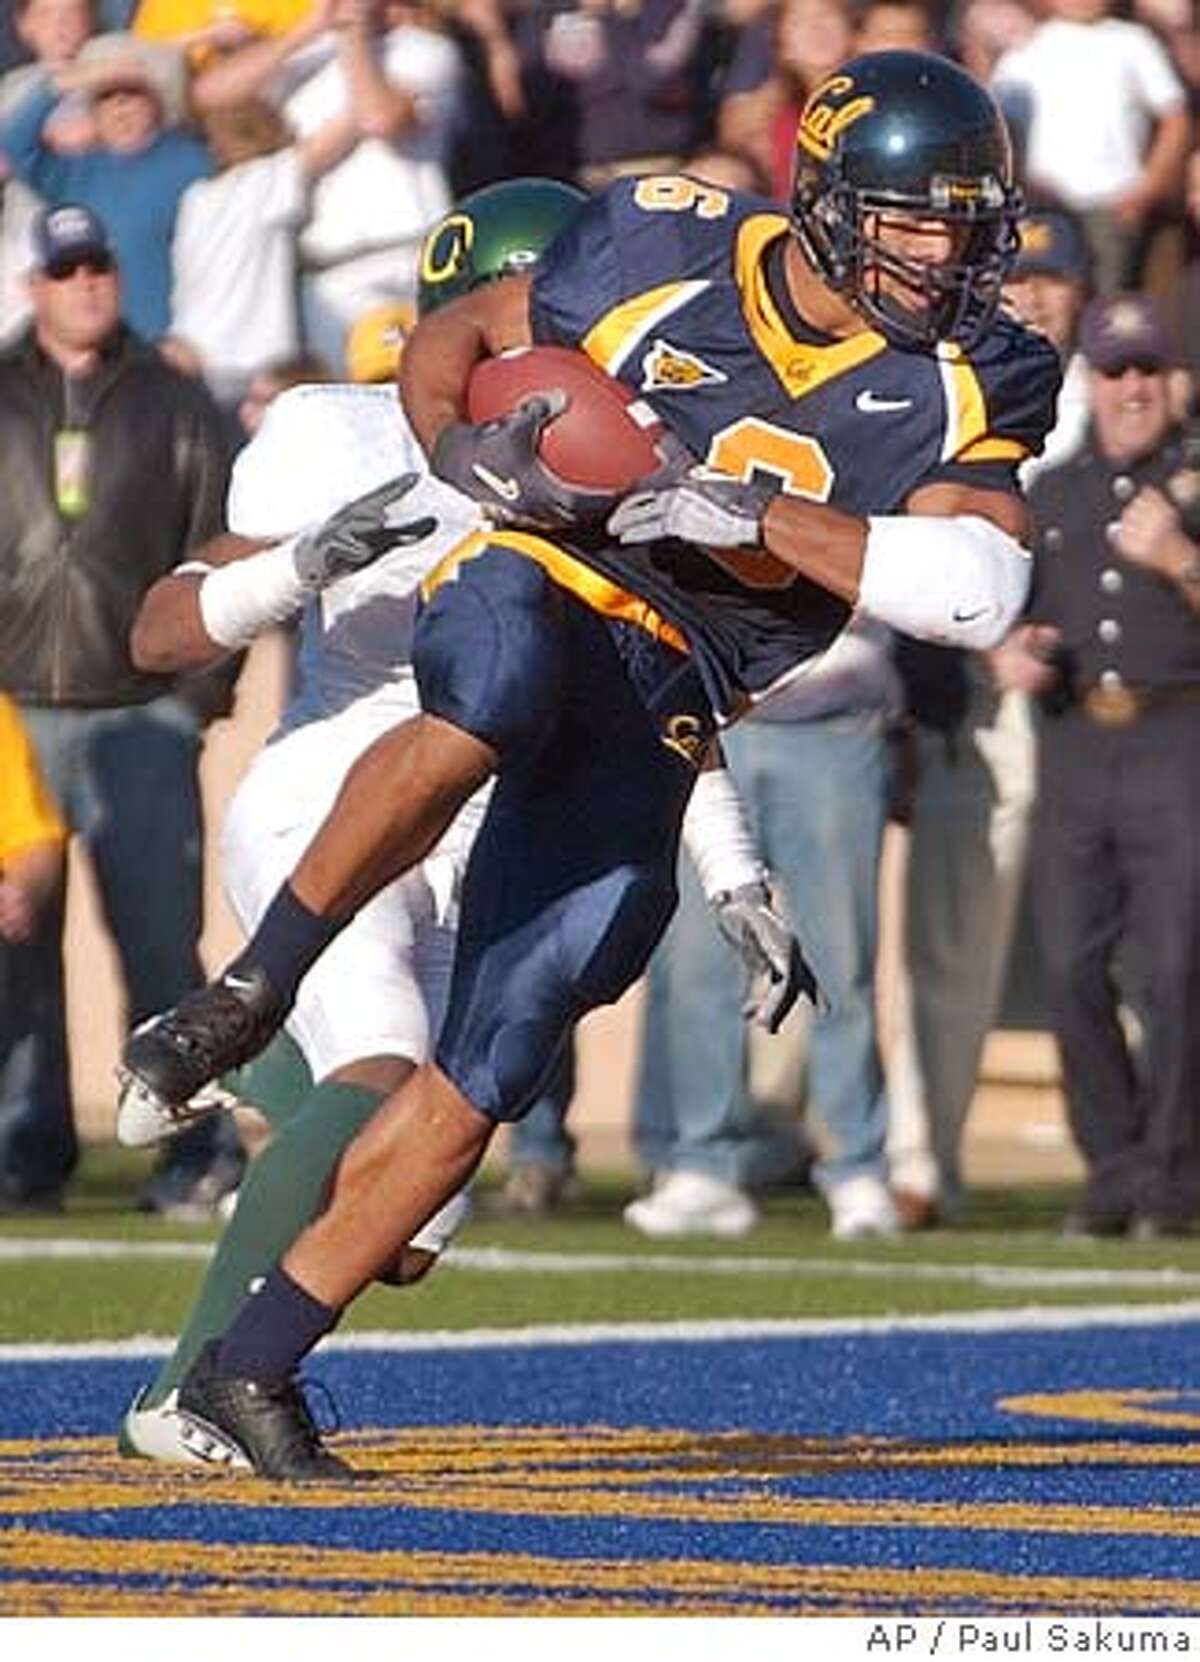 California wide receiver Geoff McArthur scores in front of unidentified Oregon player in the fourth quarter, Saturday, Nov. 6, 2004 in Berkeley, Calif. Cal defeated Oregon, 28-27. (AP Photo/Paul Sakuma) Sports#Sports#Chronicle#11/12/2004#ALL#5star##0422454562